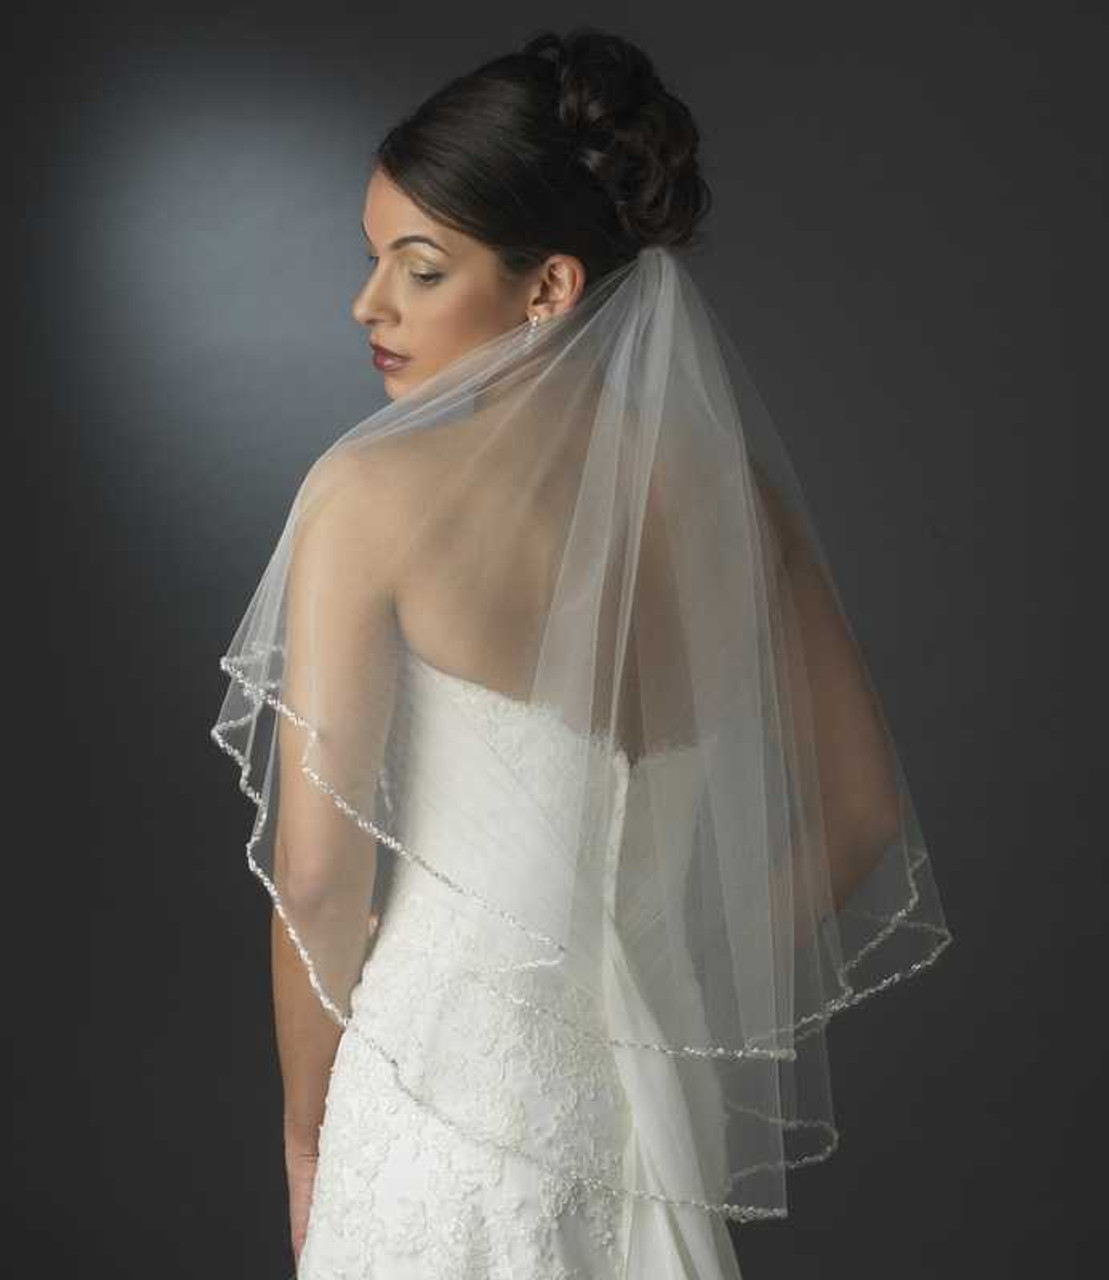 https://cdn11.bigcommerce.com/s-zb3qt33o/images/stencil/1280x1280/products/15373/60845/Two-Layer-Elbow-Length-Wedding-Veil-with-Beaded-Pearl-Edge_26341__03158.1689477712.jpg?c=2